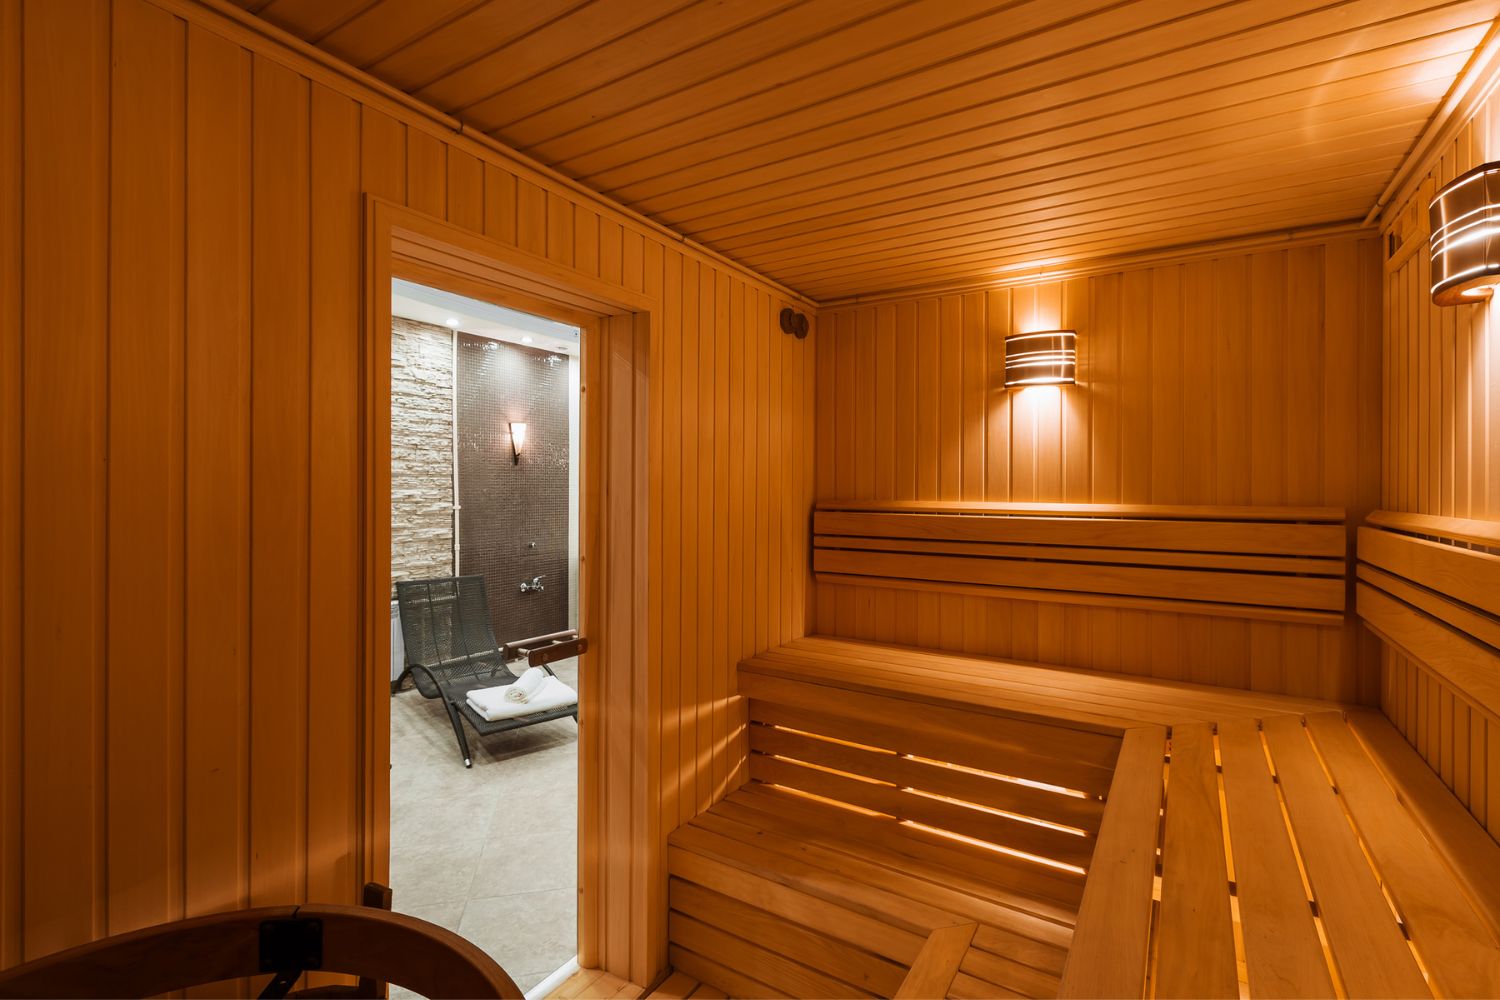 How Much Does a Home Sauna Cost to Install